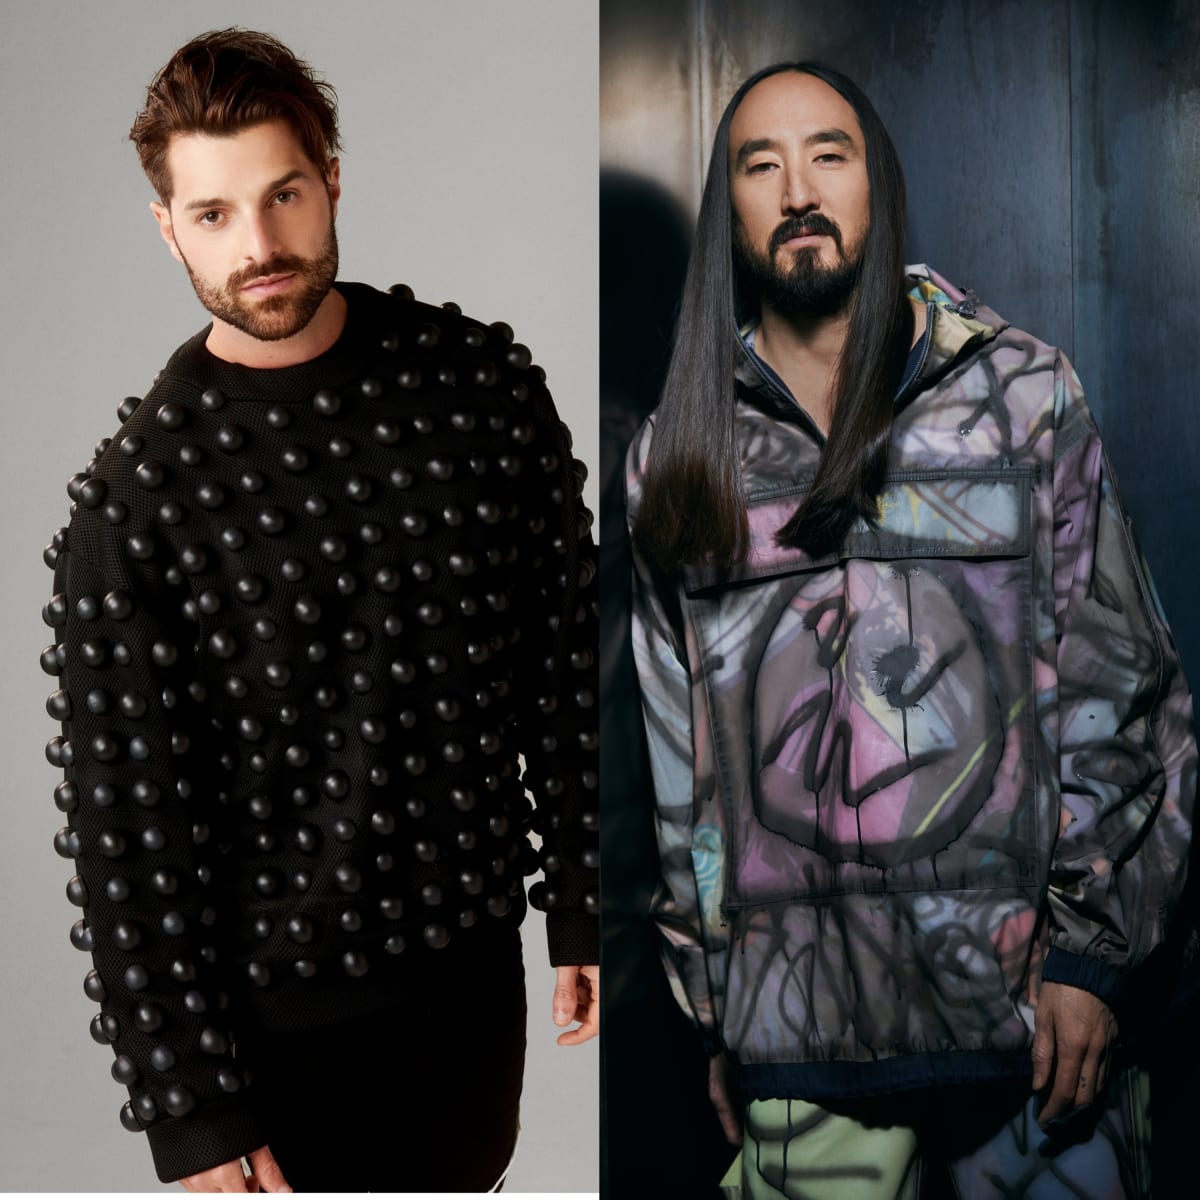 Alok and Steve Aoki Are Firing On All Cylinders With New Collaboration, “2 Much 2 Handle”